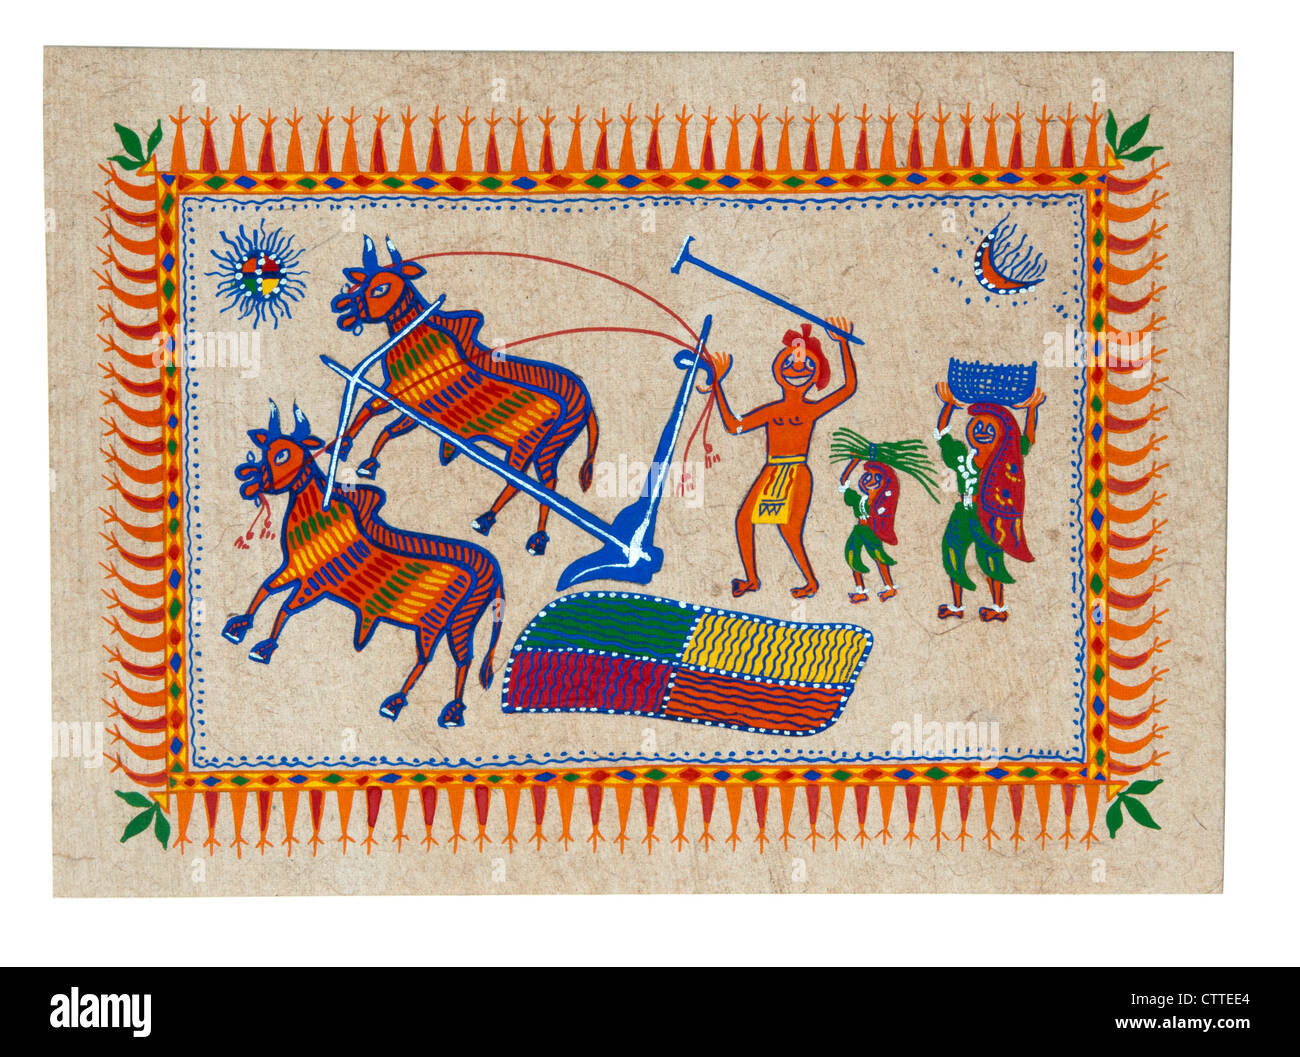 Tribal art India, Gond painting illustrating stories of agriculture in olden days, bullock cart ploughing field Stock Photo